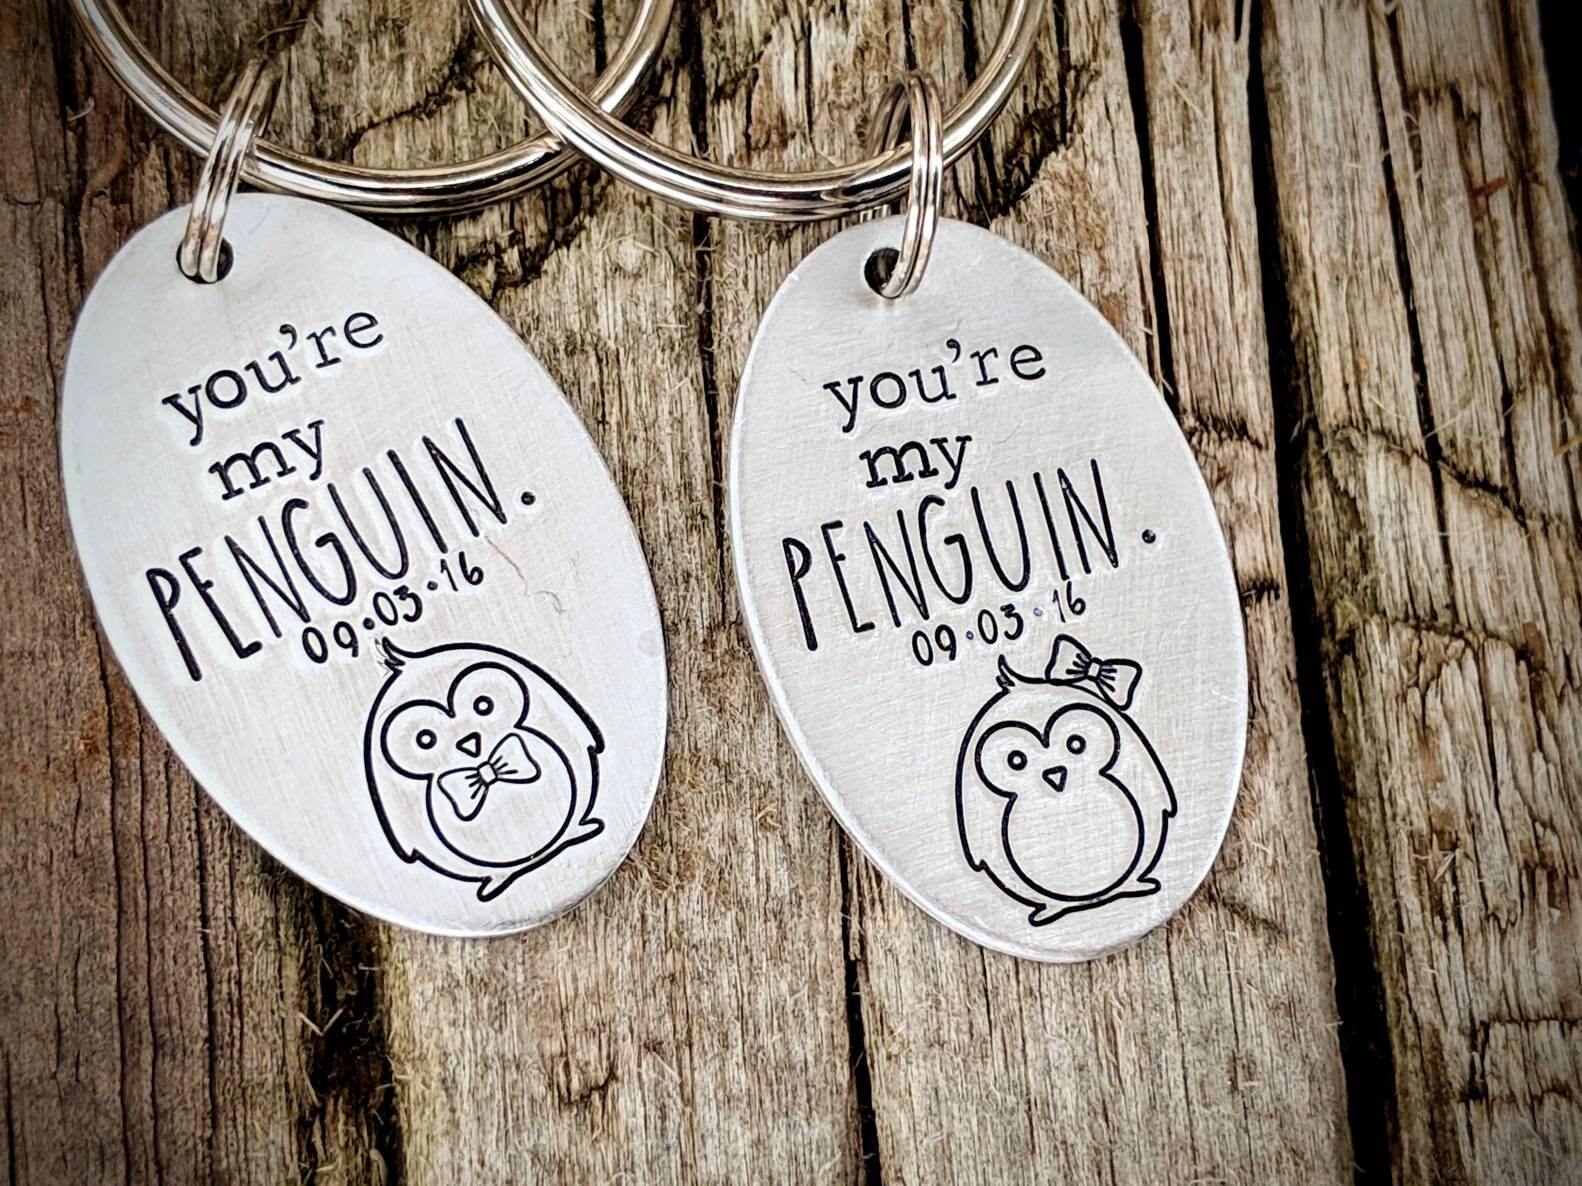 Personalized hand stamped penguin keychains. Couples gift set. | Etsy